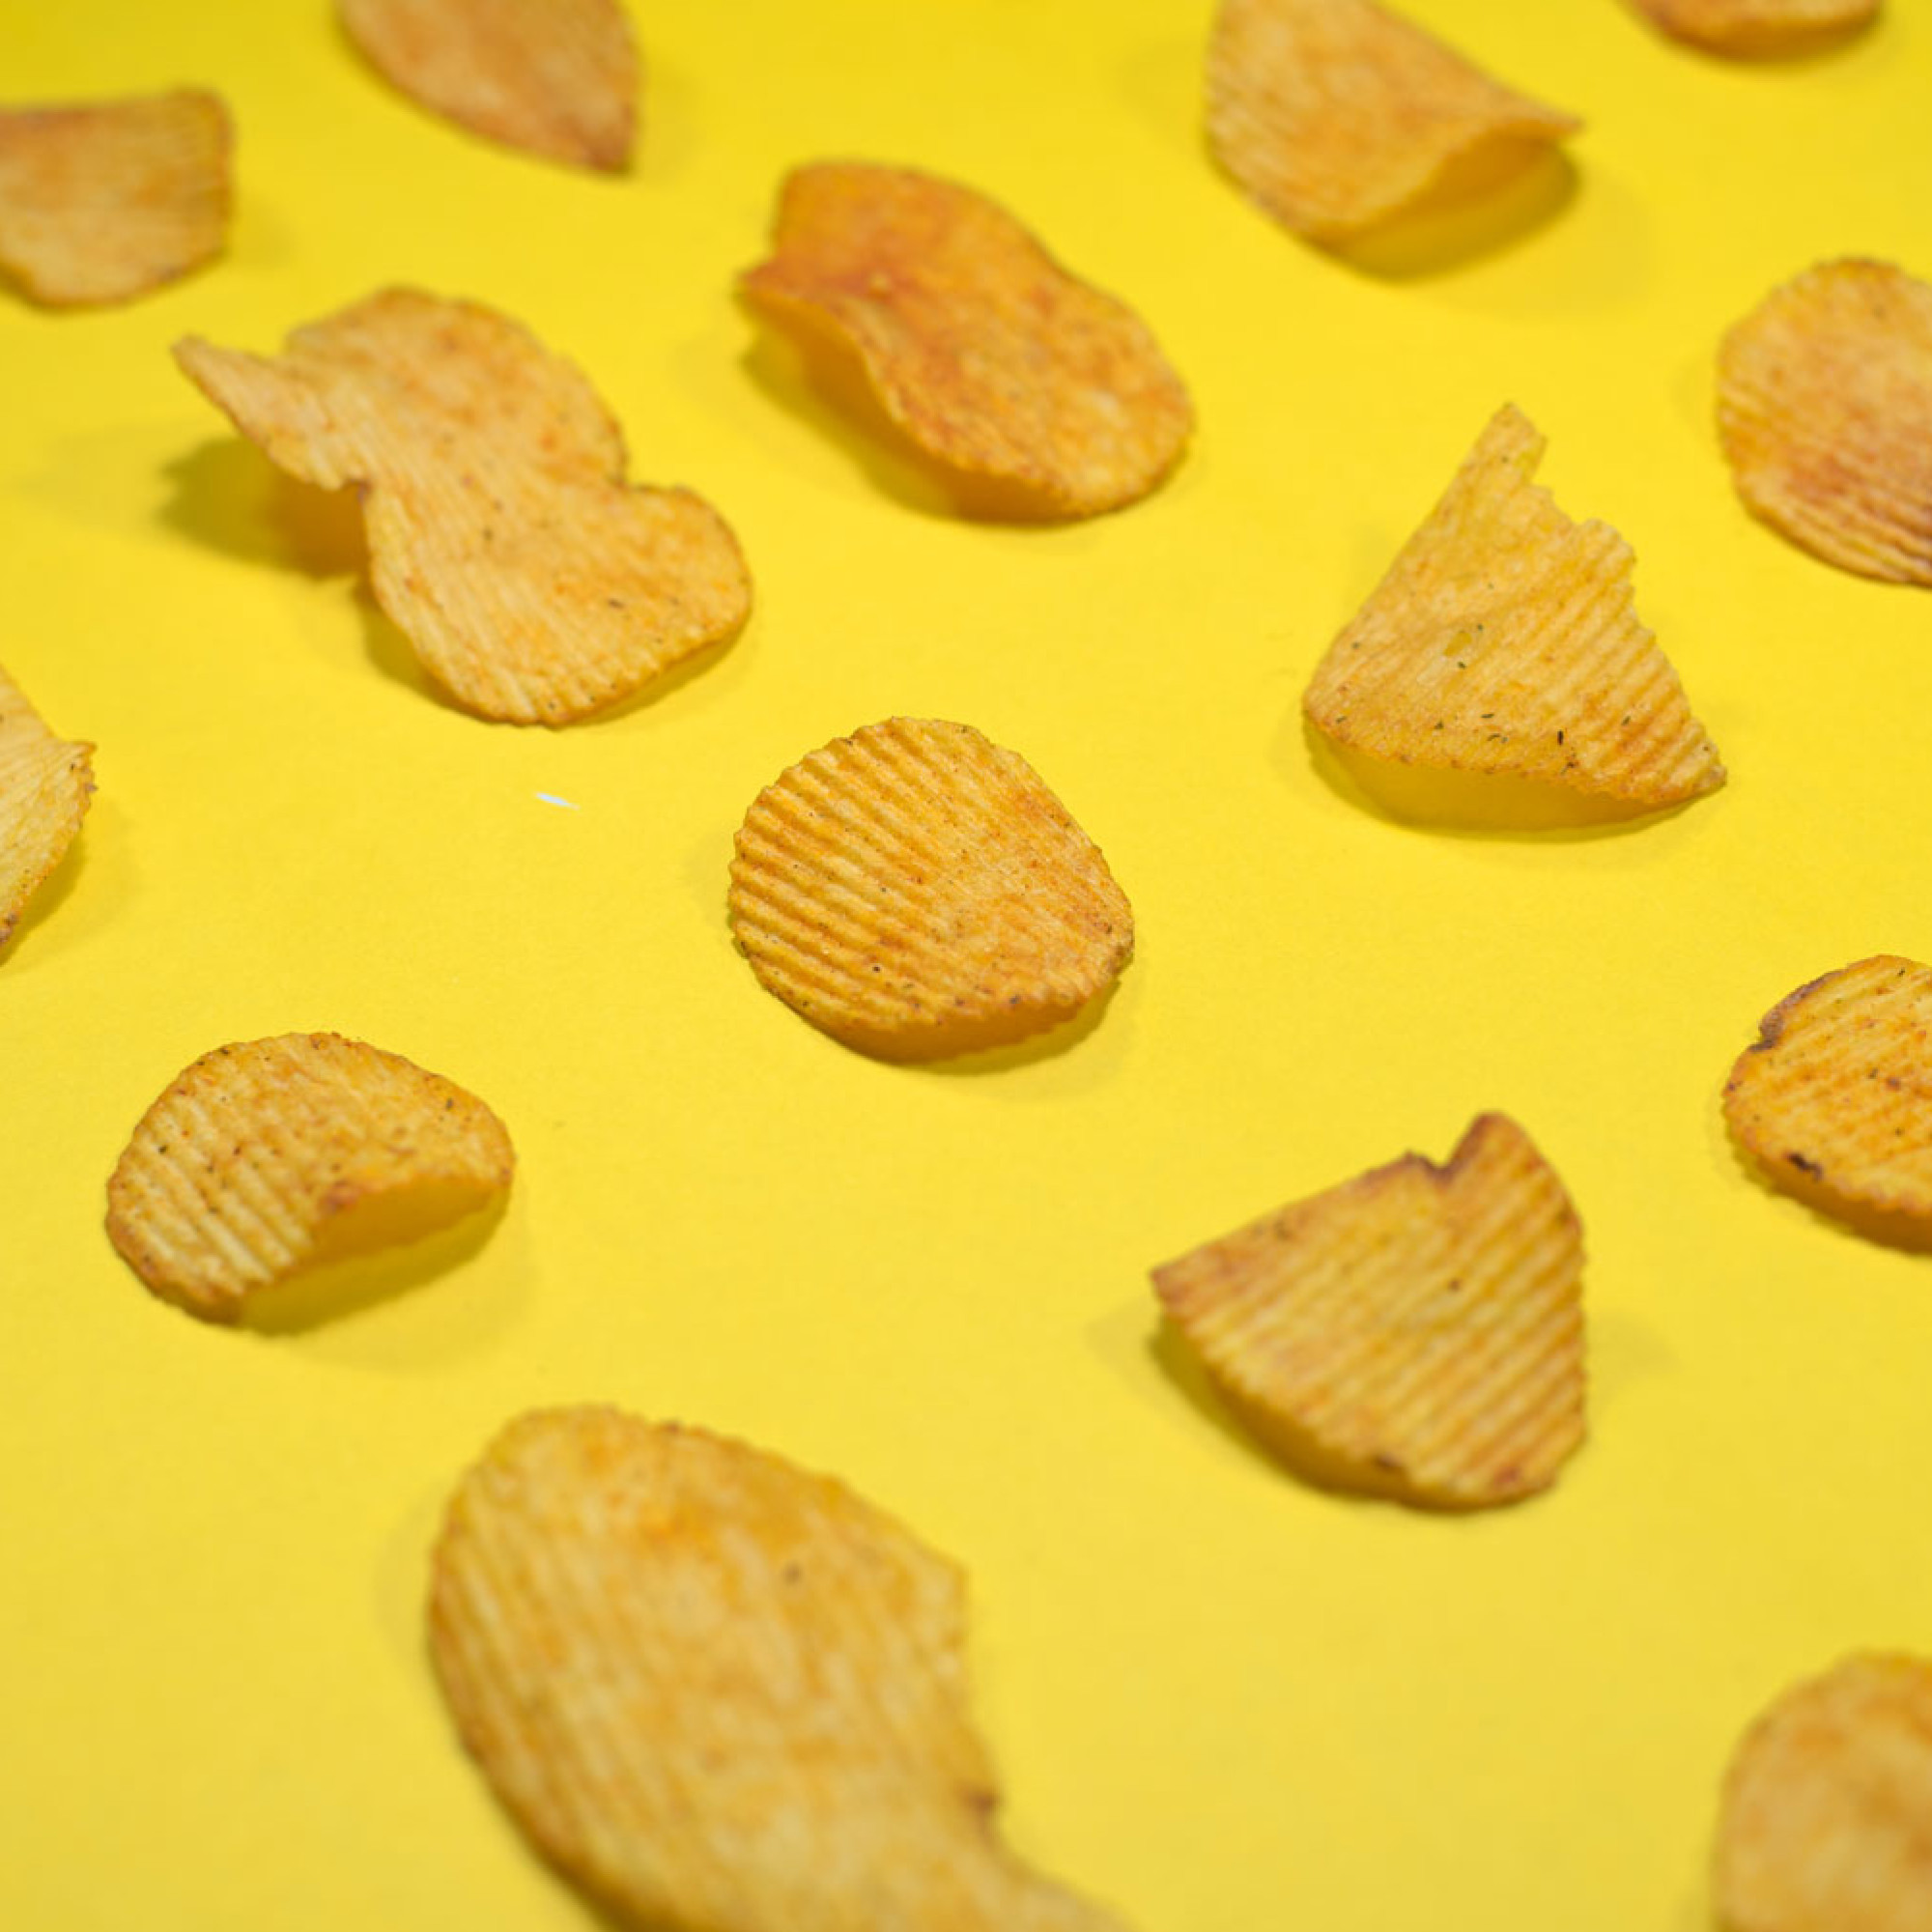 How The Cost-of-Living Crisis Will Impact Snacking